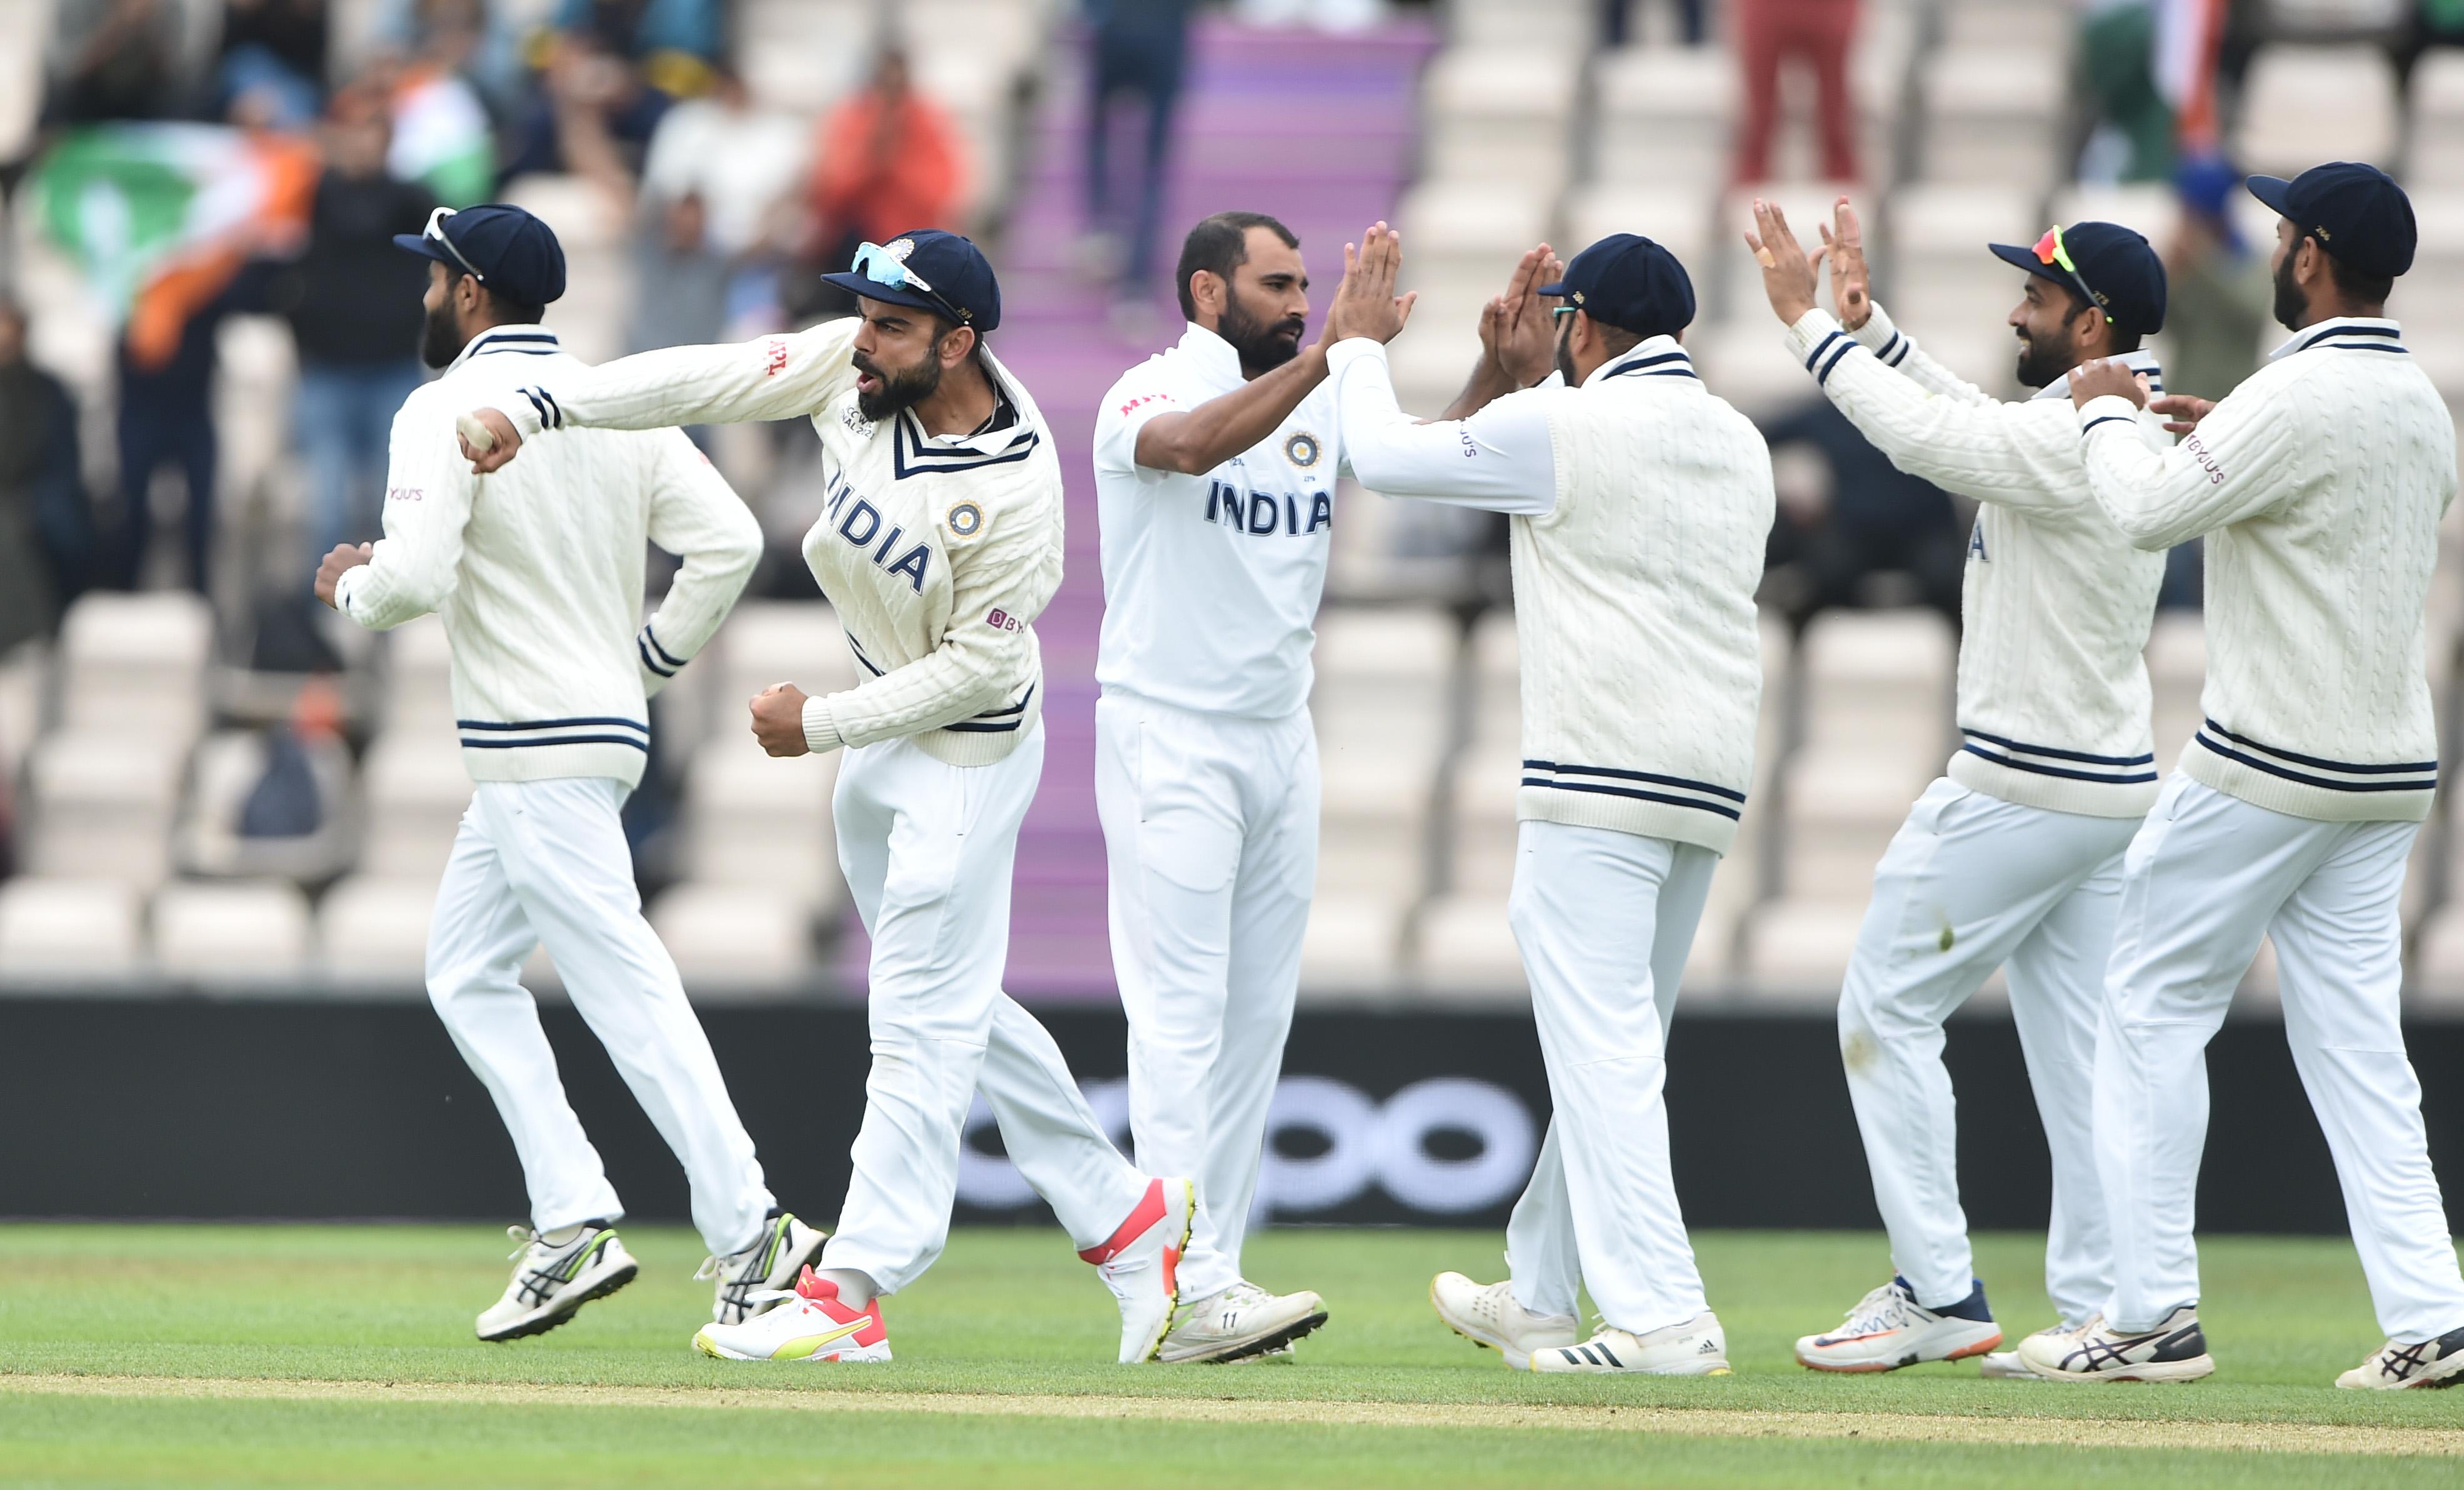 Reports | India in line to play tour games before England Test series